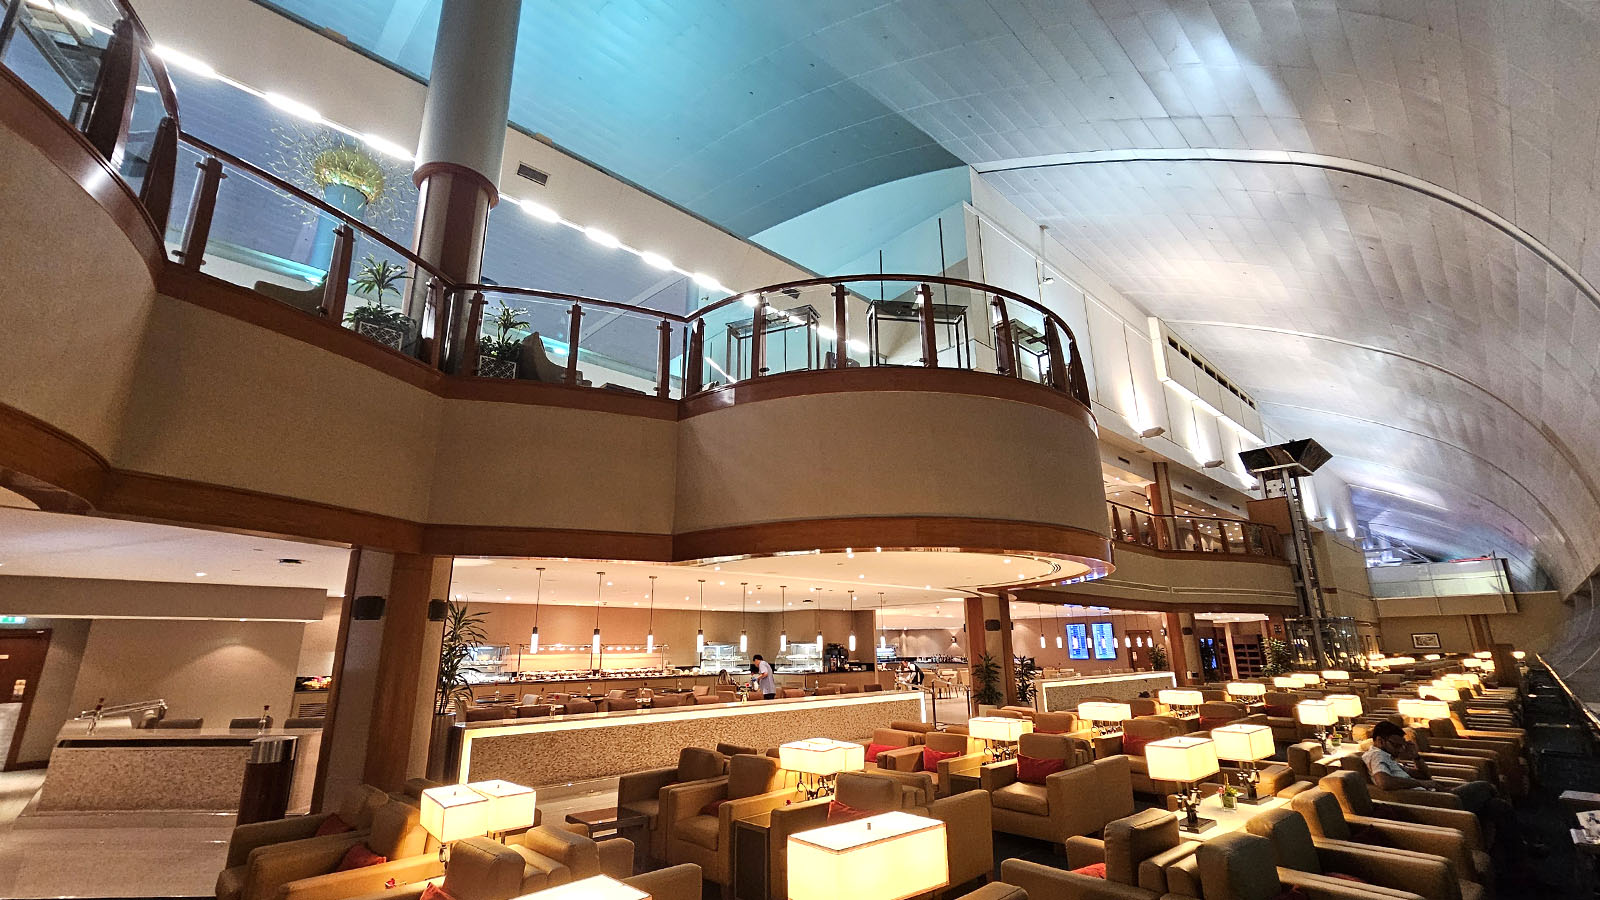 Upstairs in the Emirates Business Class Lounge, Dubai T3 Concourse C